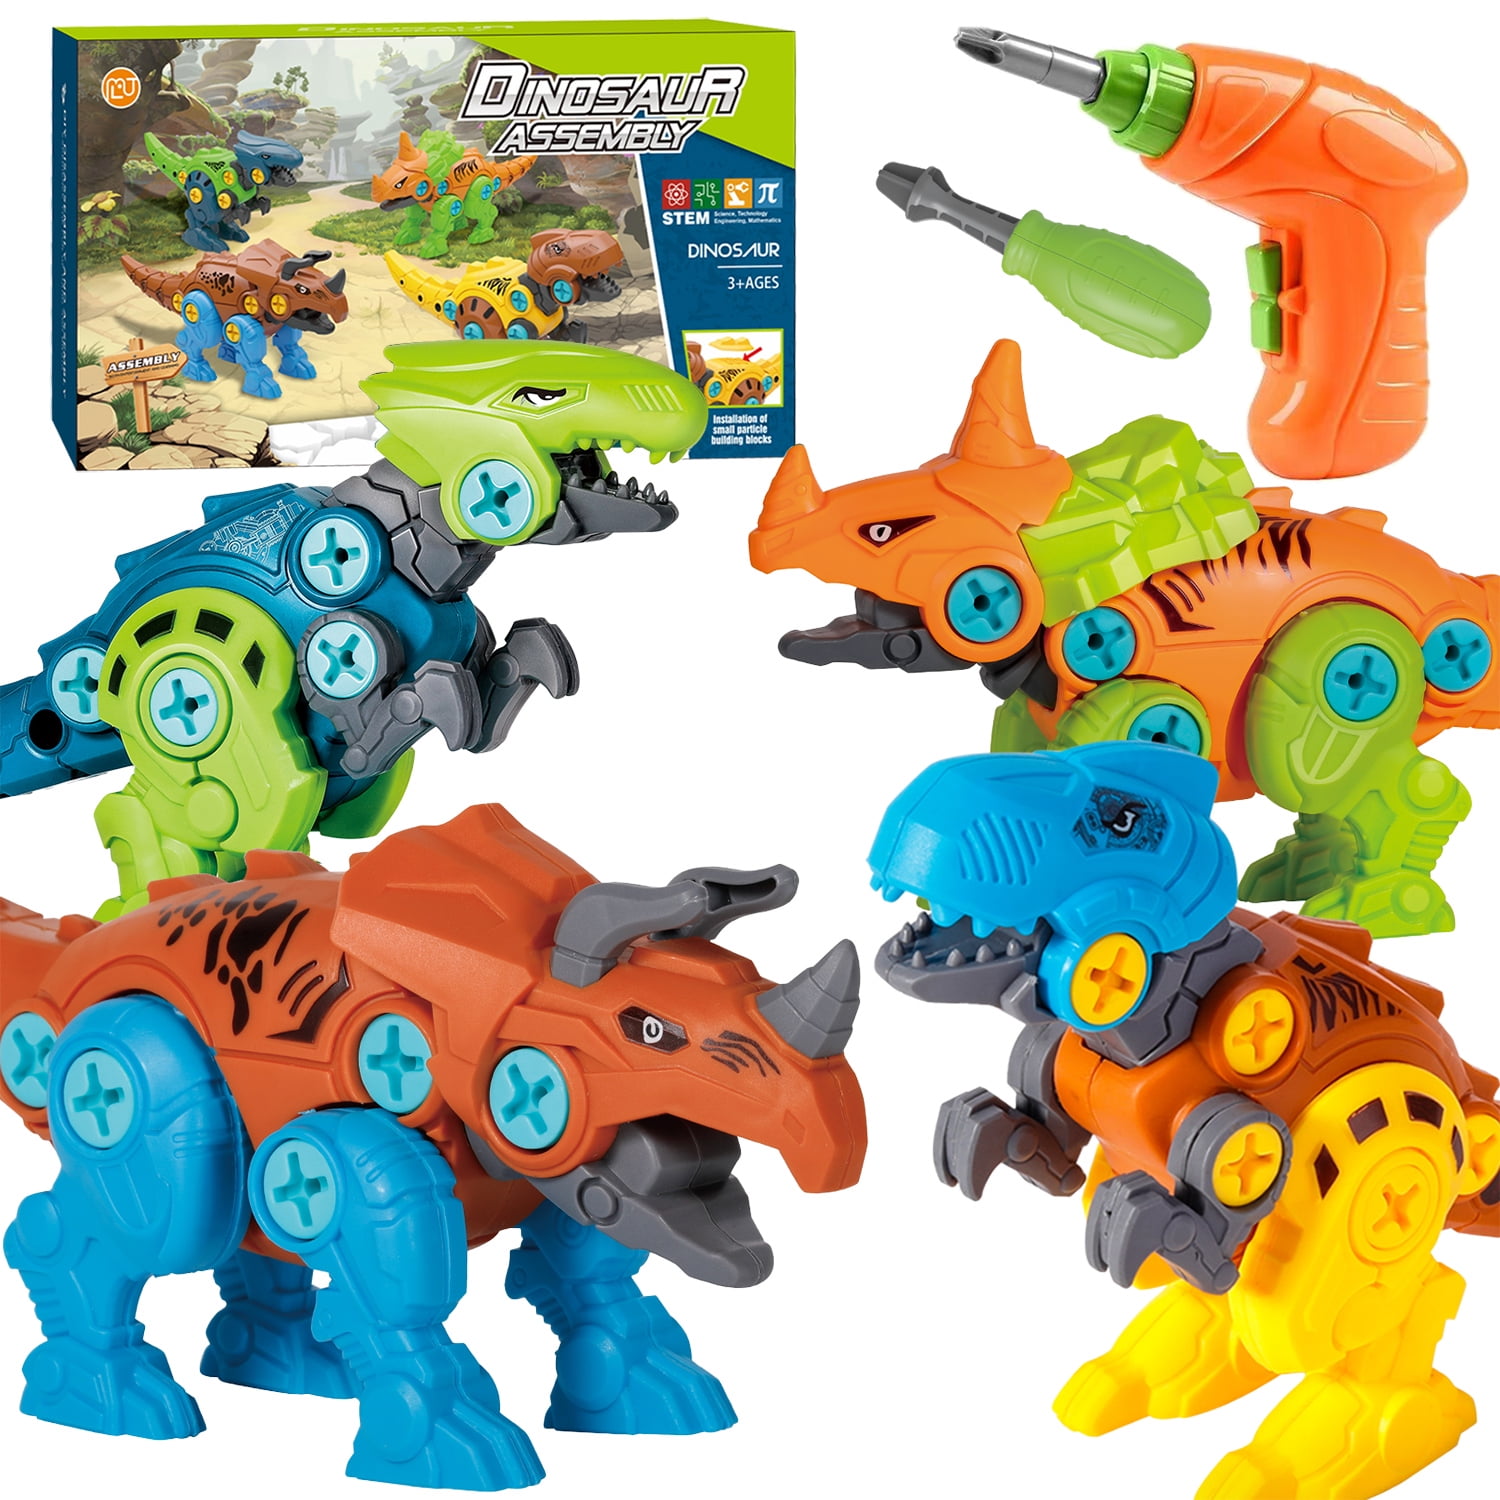 VNVDFLM 3 Pcs Take Apart Dinosaur Toys for Kids Age 3 4 5 6 7 L-r3, Red, Green, Brown Building Toy Set Learning Gifts for Boys and Girls Construction Play Kit Take Apart Toys with Electric Drill